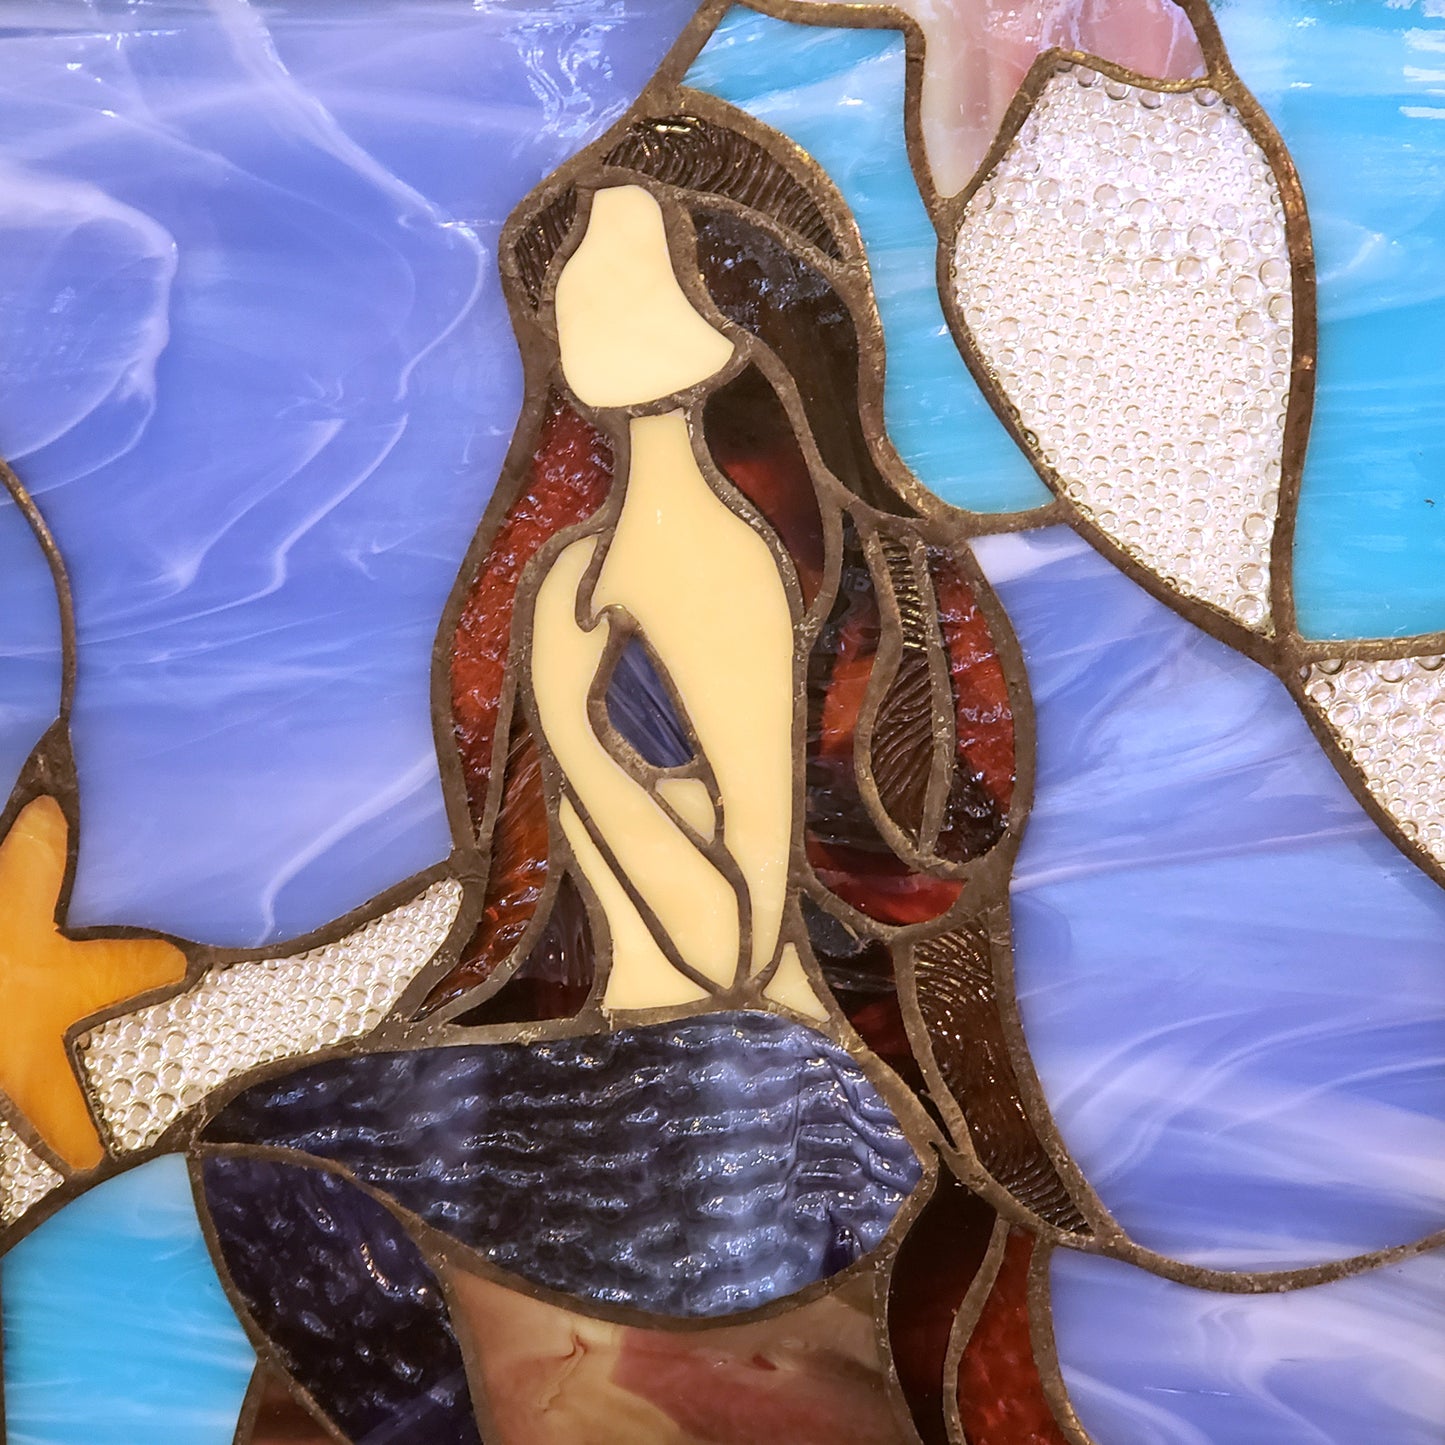 Stained Glass Mermaid